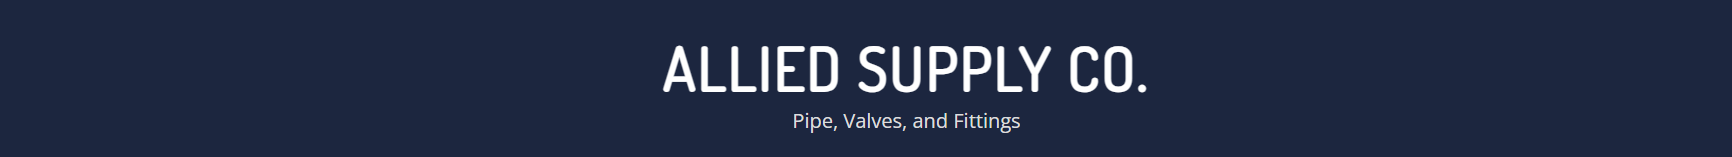 steel pipe manufacturer_Allied Supply Company, Inc.